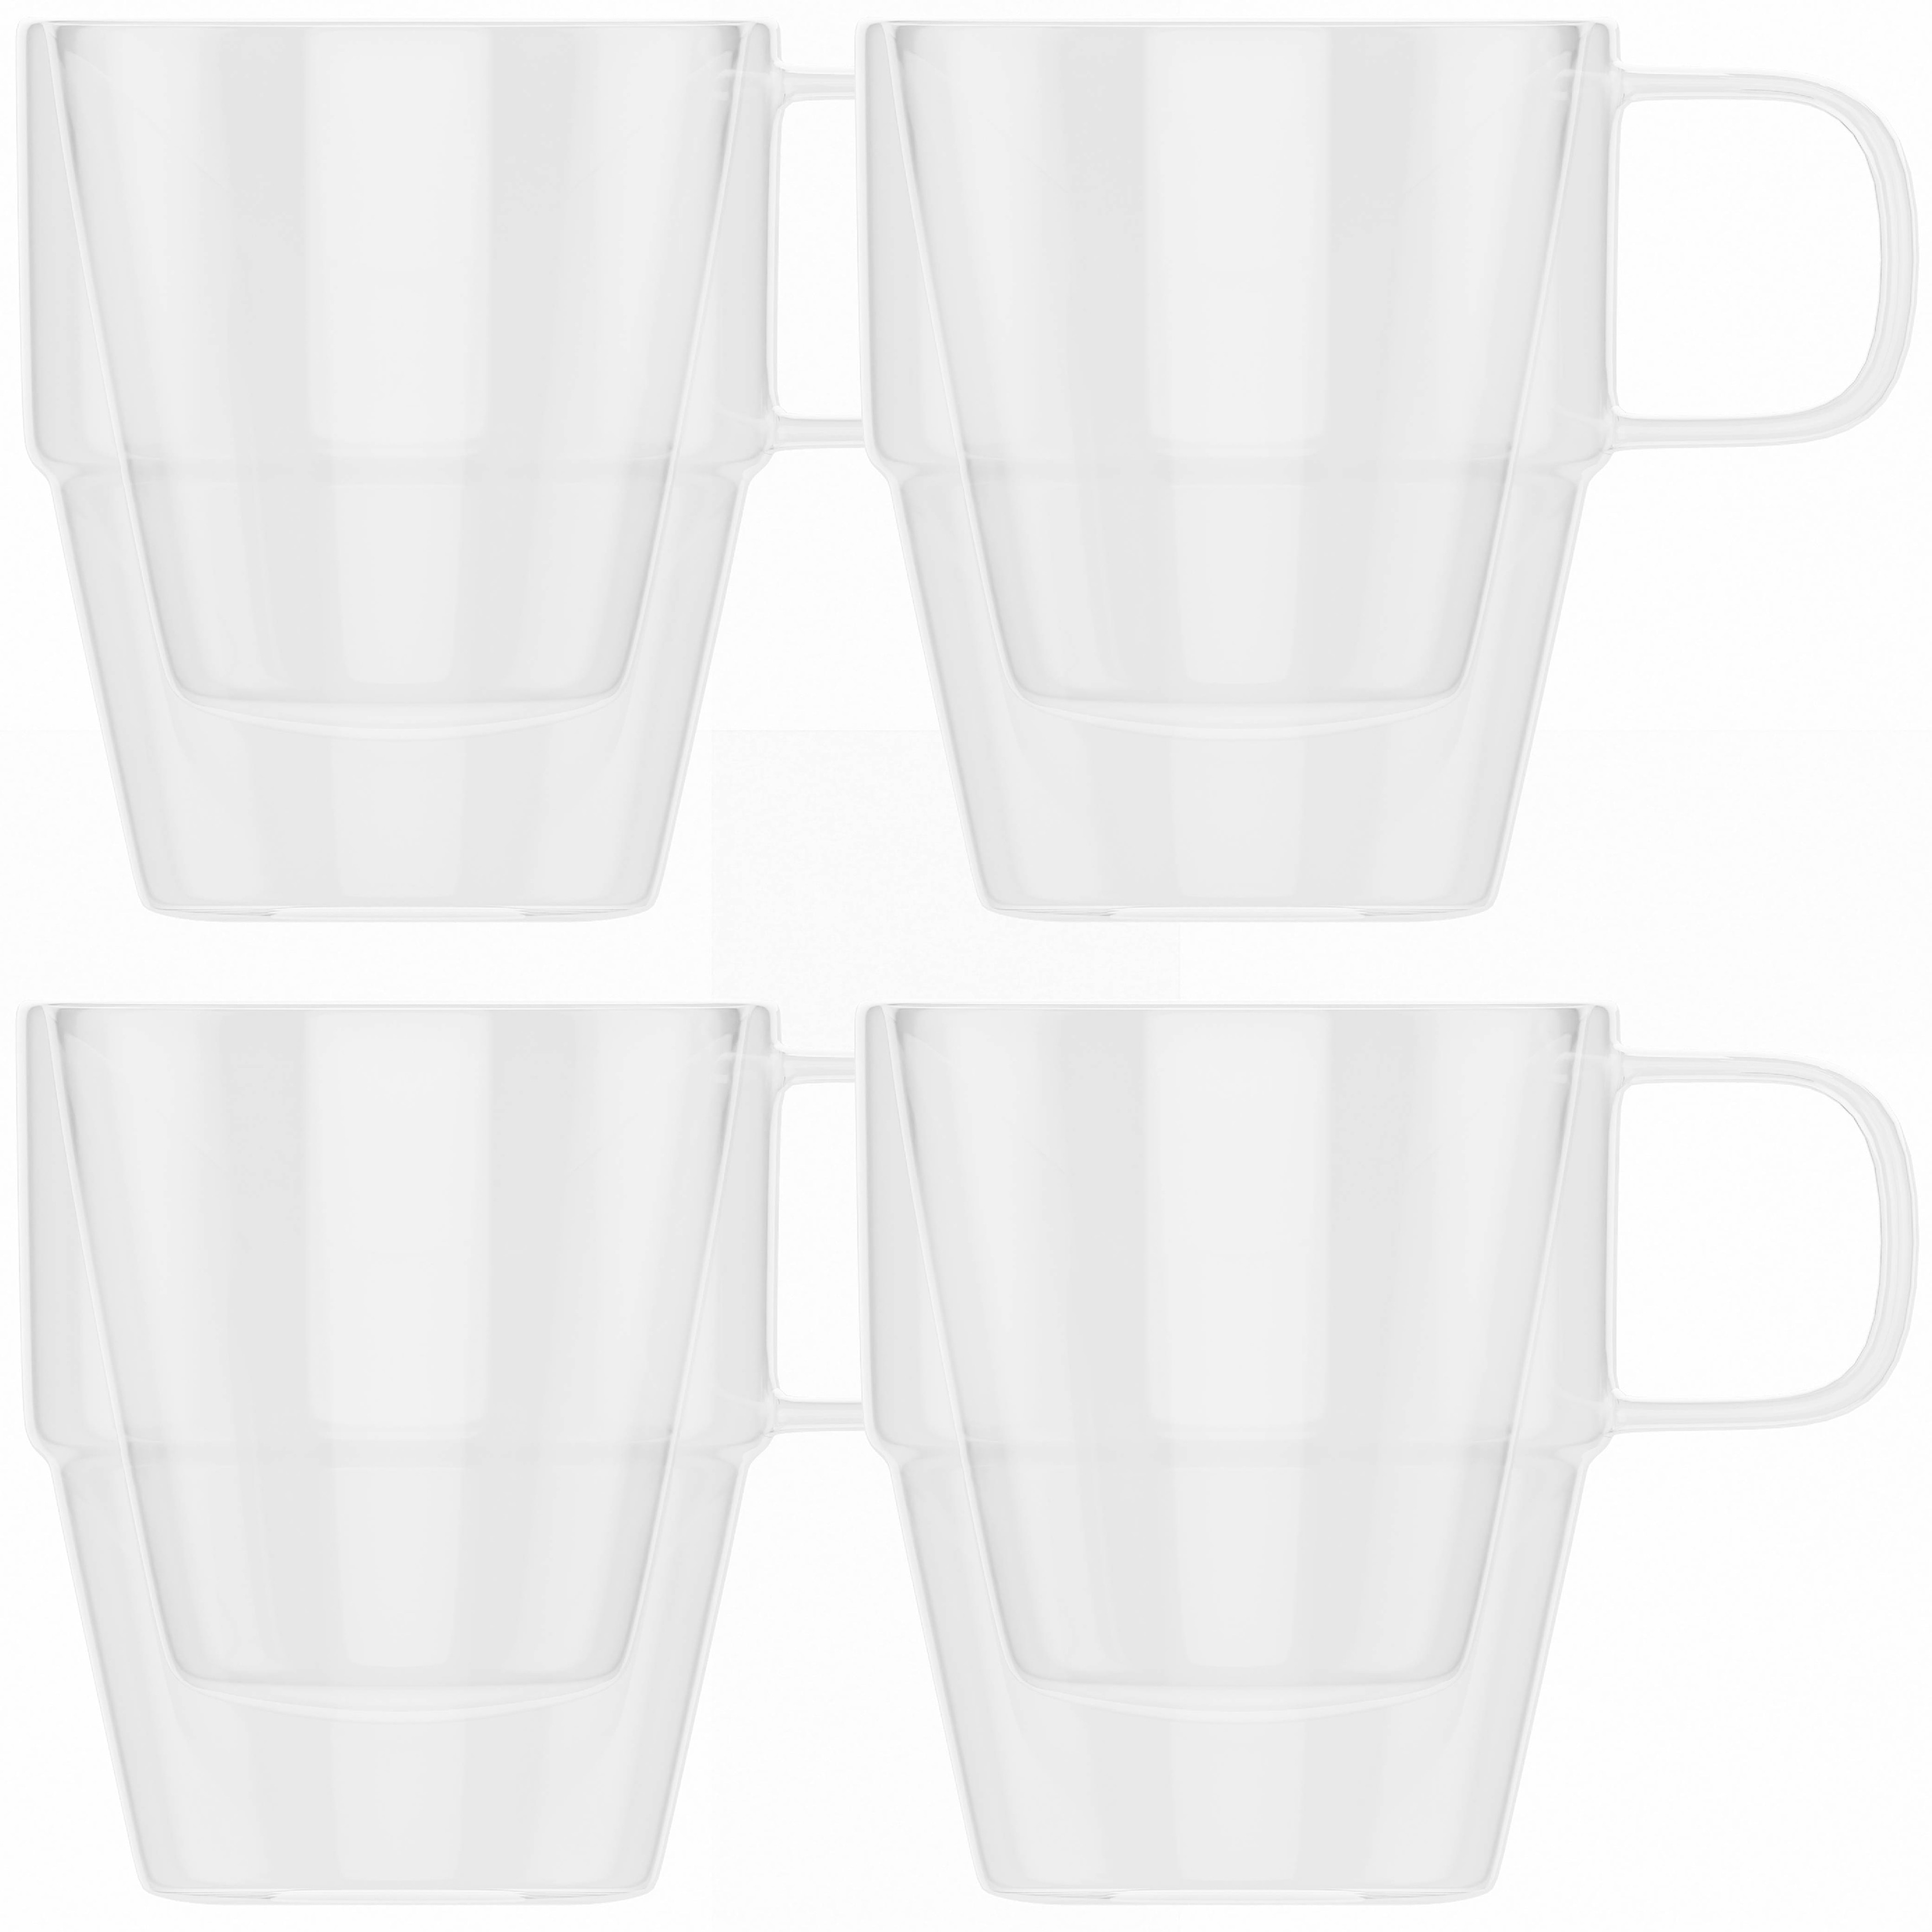 Elle Decor Double Wall Clear Coffee Cups Set of 4